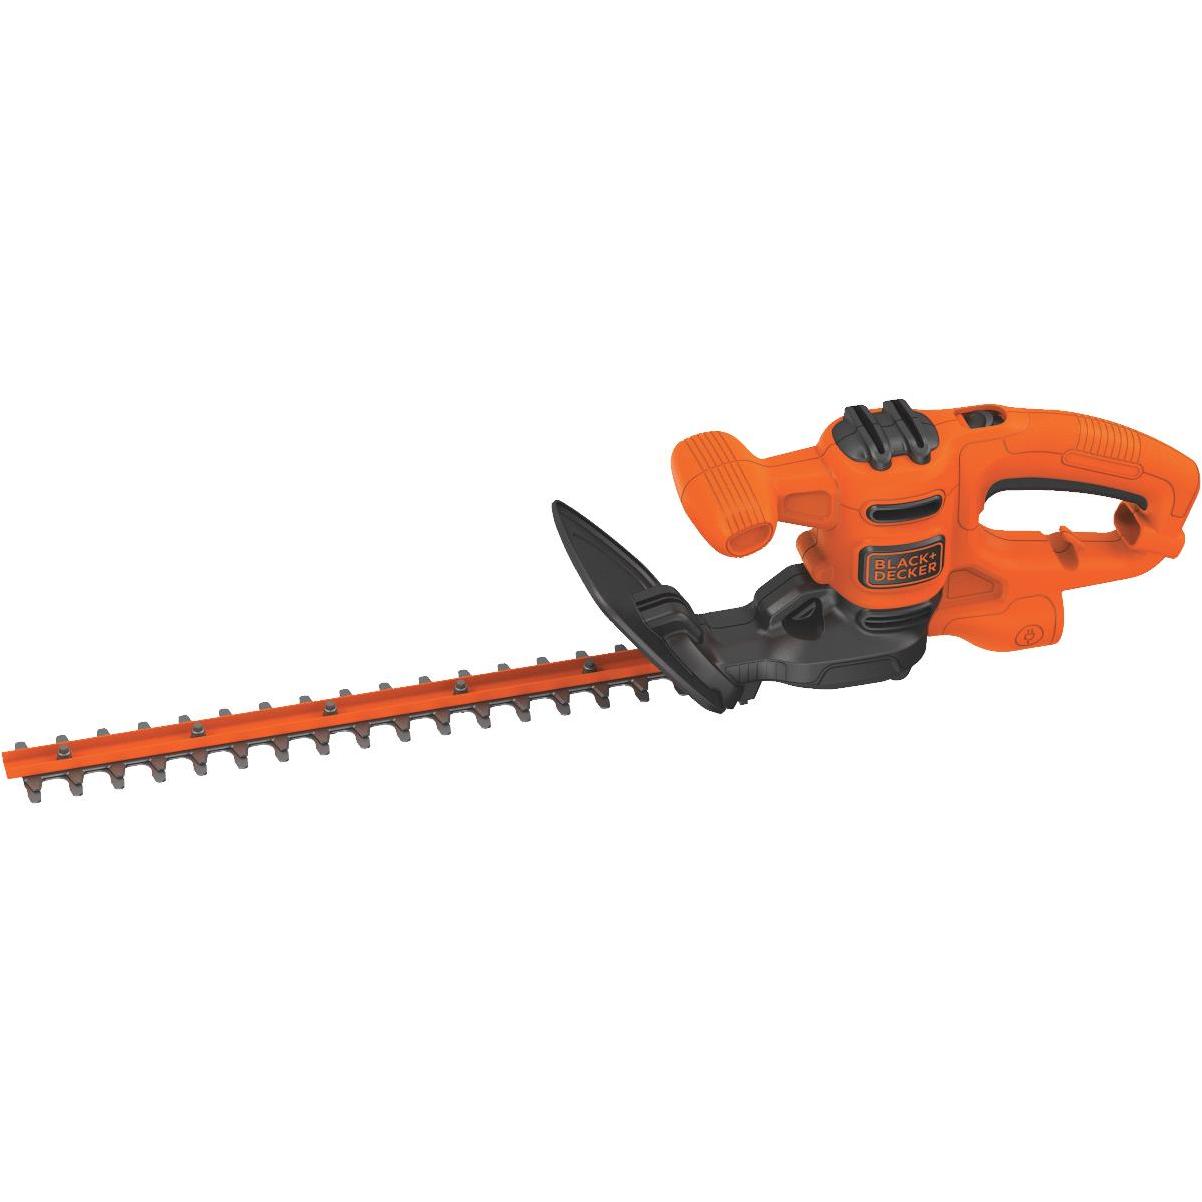 Black & Decker 14 In. 6.5-Amp Straight Shaft Corded Electric